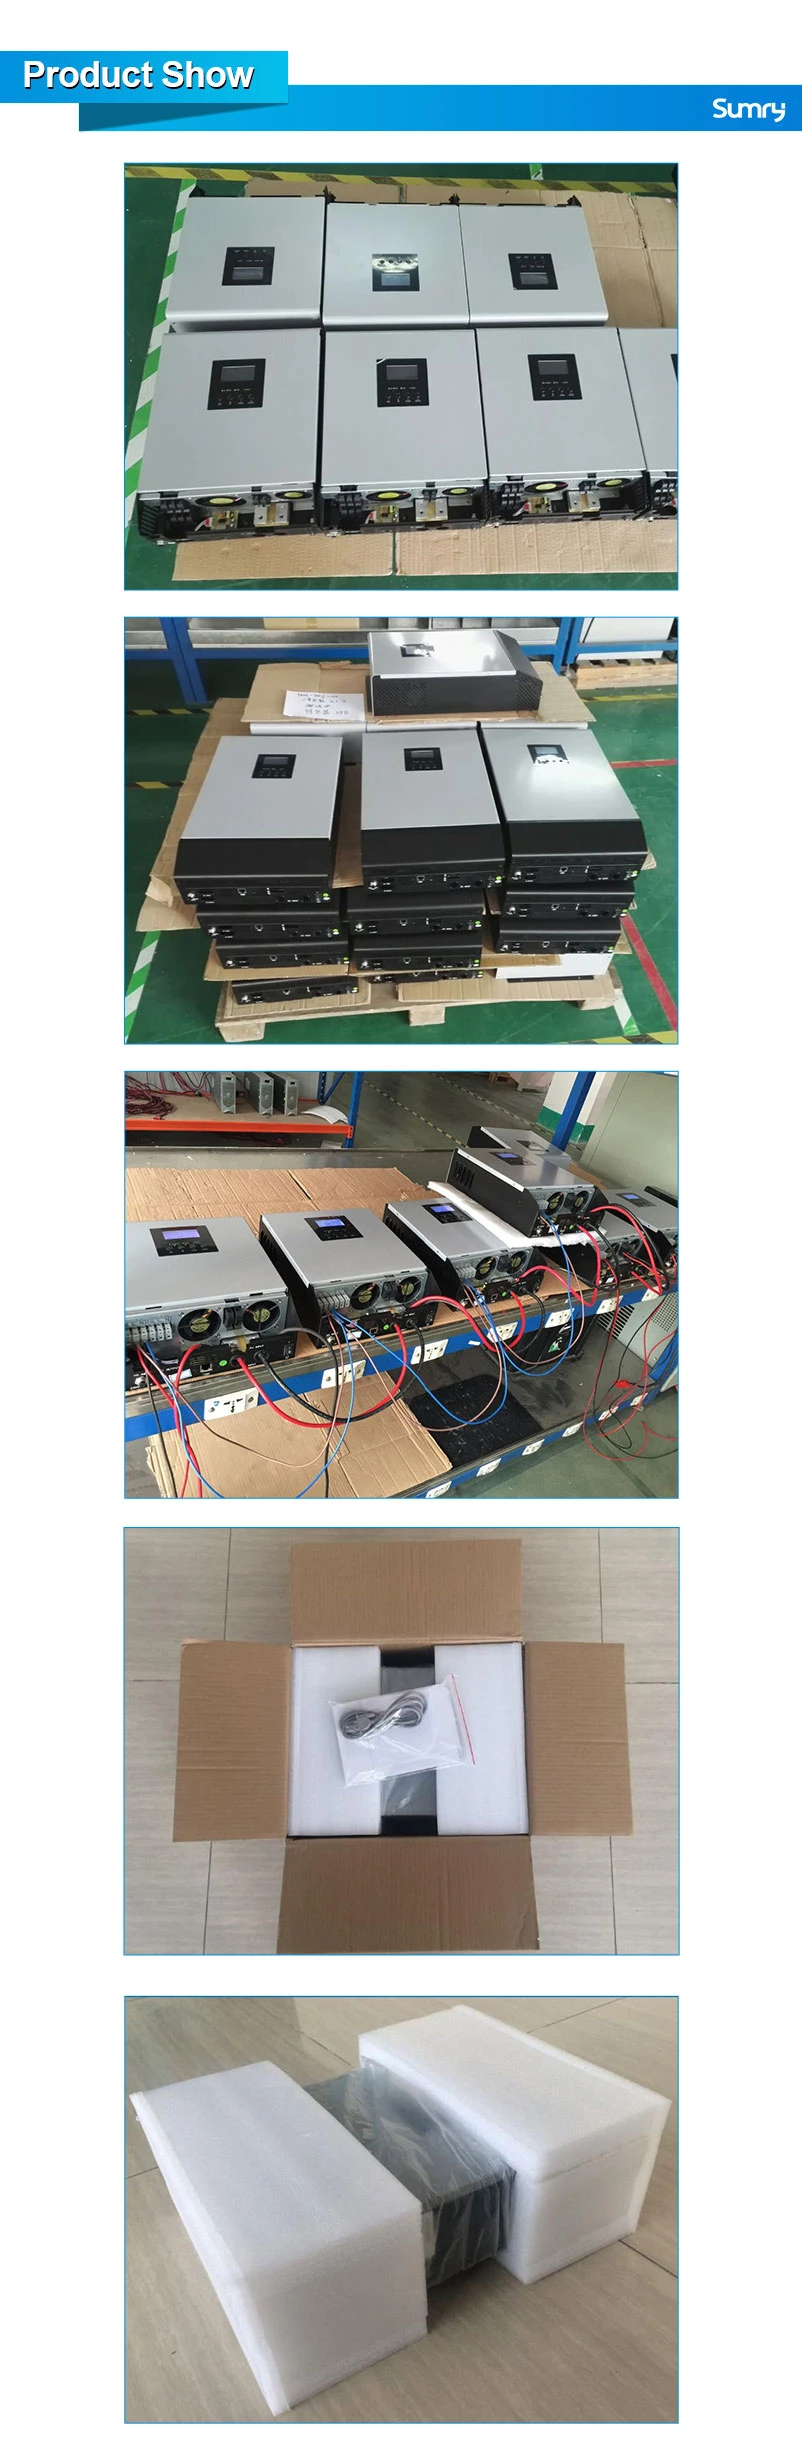 1-5kVA off-Grid High Frequency Pure Sine Wave Inverter with 230V MPPT Solar Charge Controller Inverter